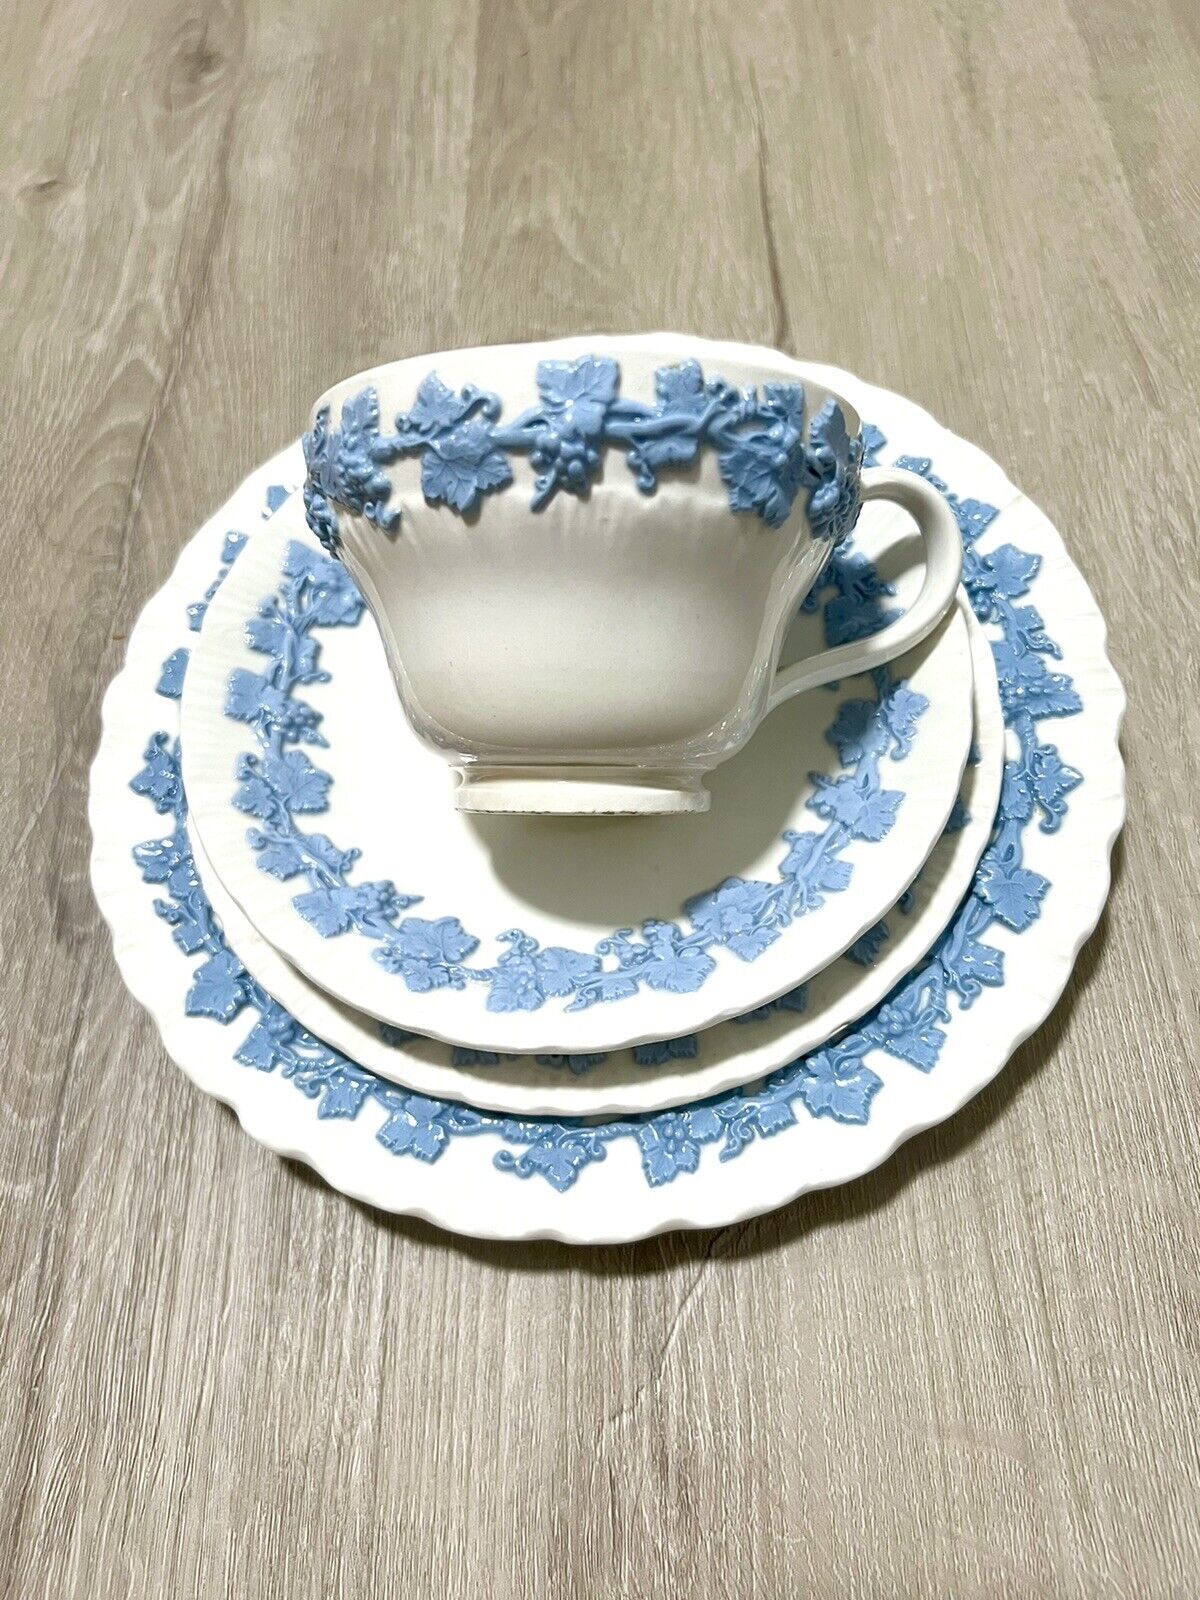 Wedgewood Queens Embossed Ware Lavender on Cream Tea cup , Saucer and Plate set